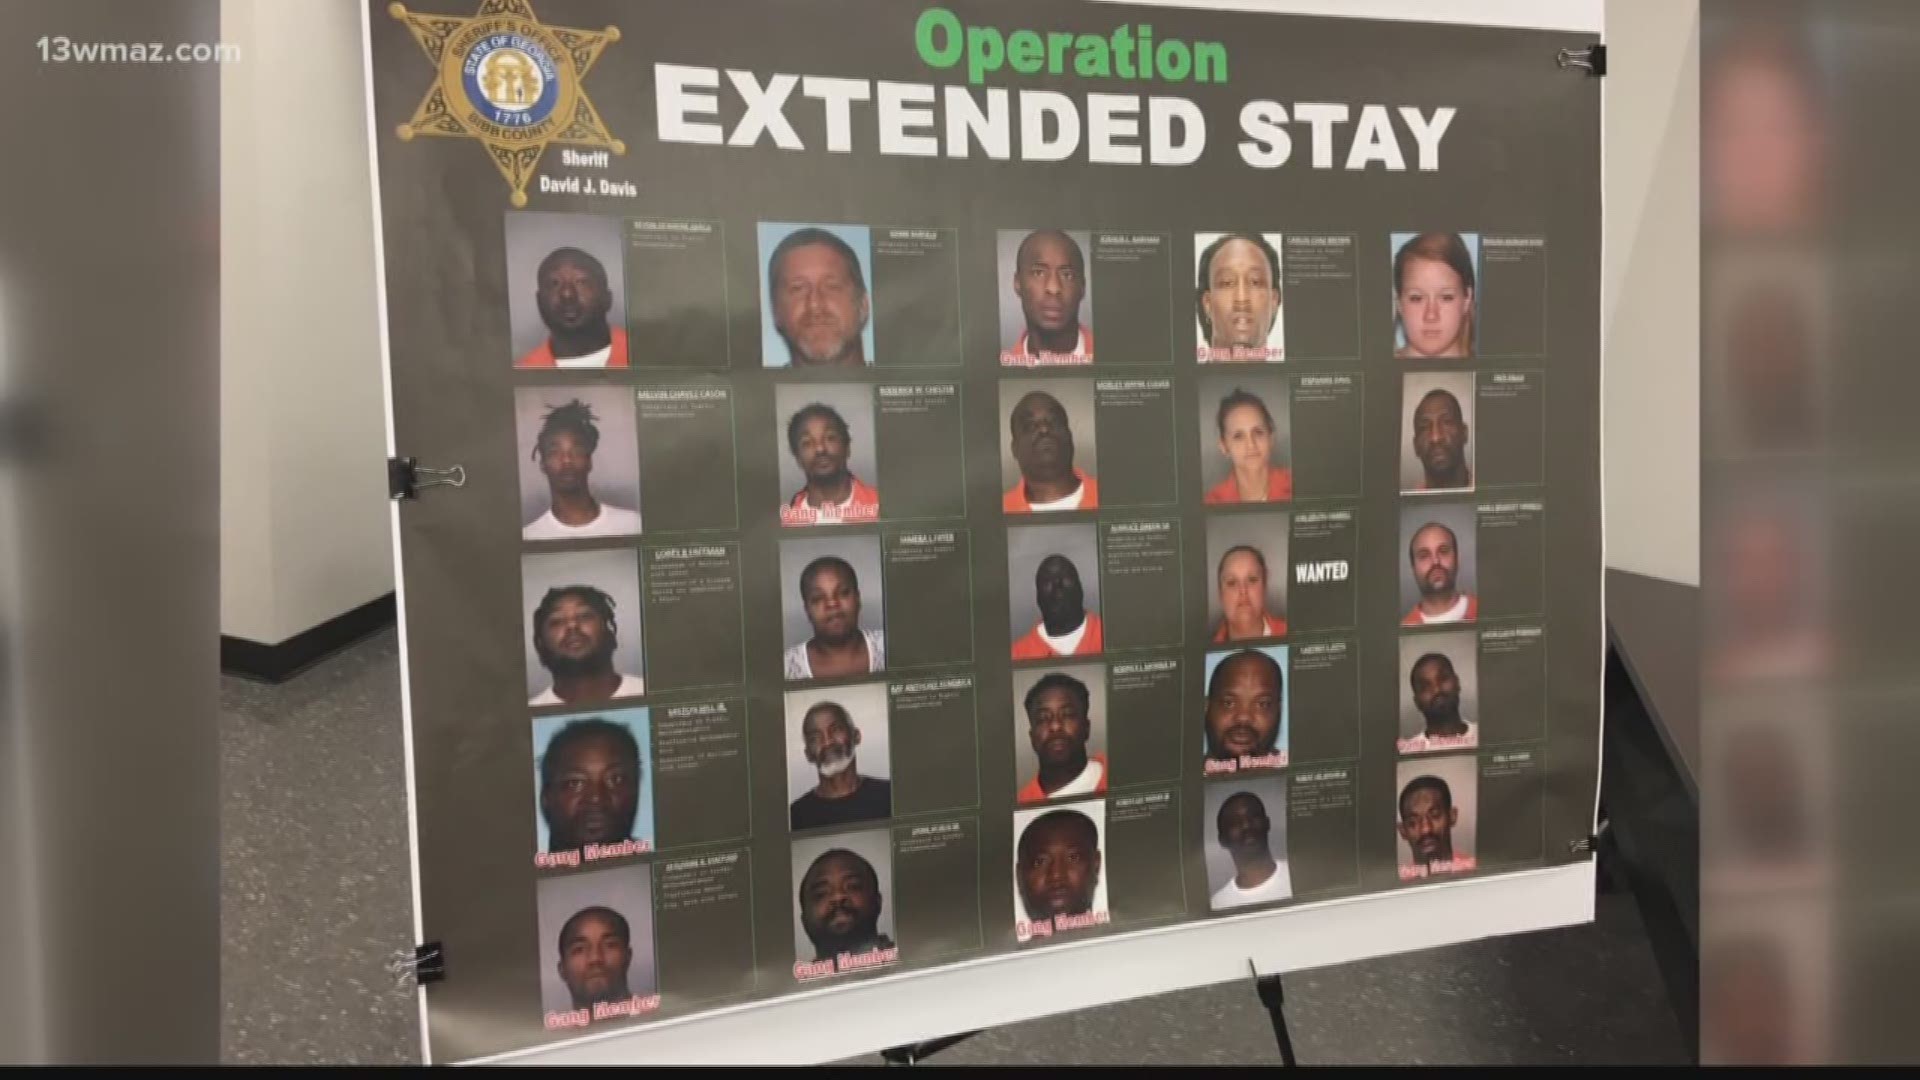 An investigation into a multi-gang drug trafficking organization ended in an arrest for 24 people, according to the Bibb County Sheriff's Office.